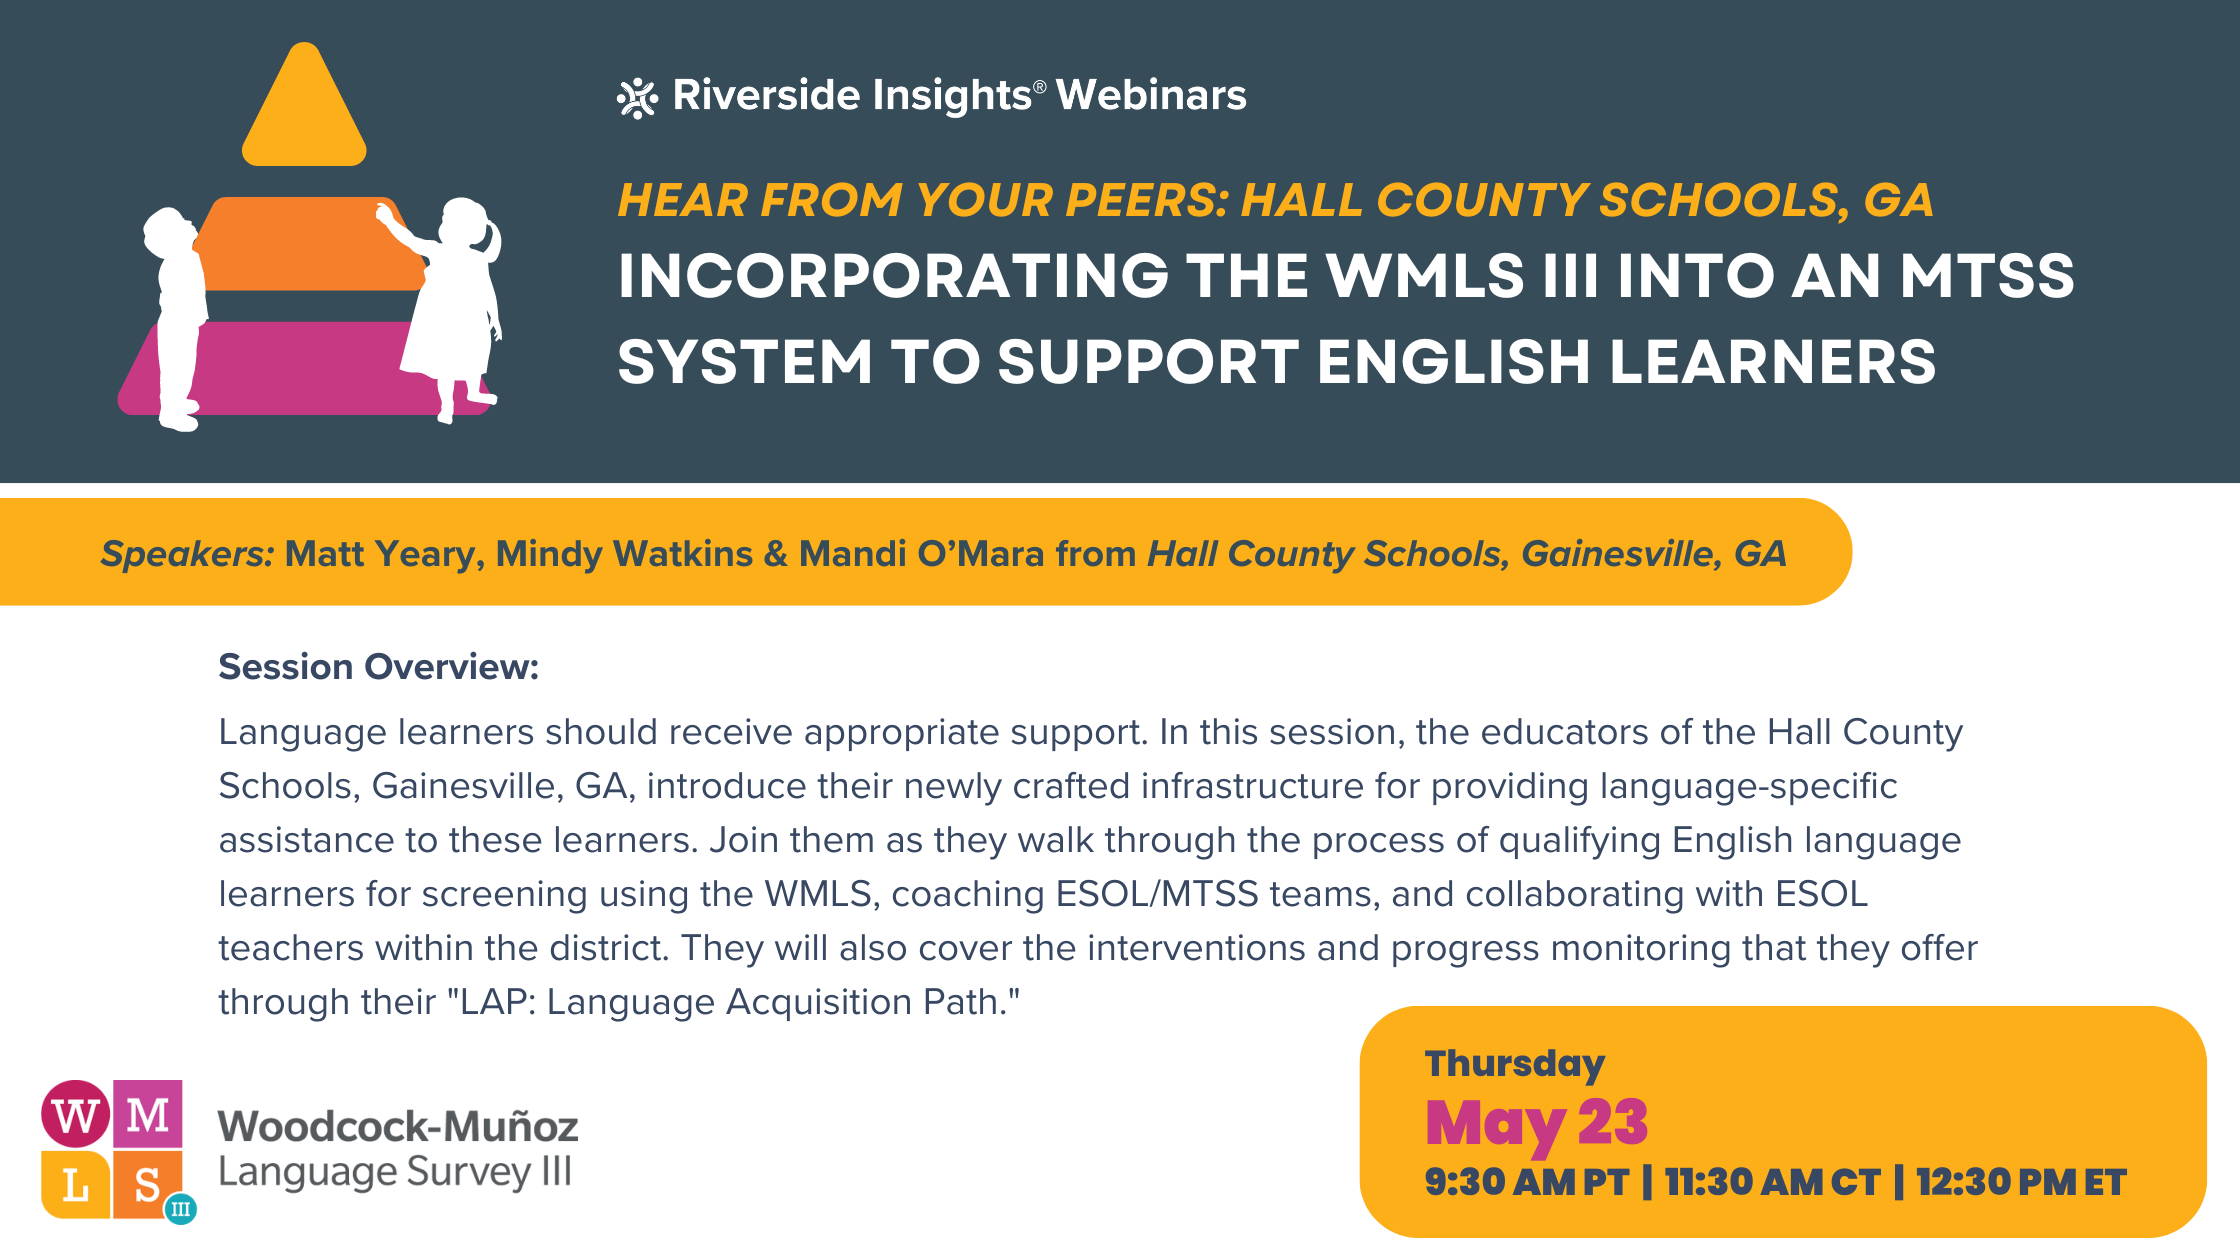 Hear From Your Peers: Incorporating the WMLS III into an MTSS System to Support English Learners Webinar